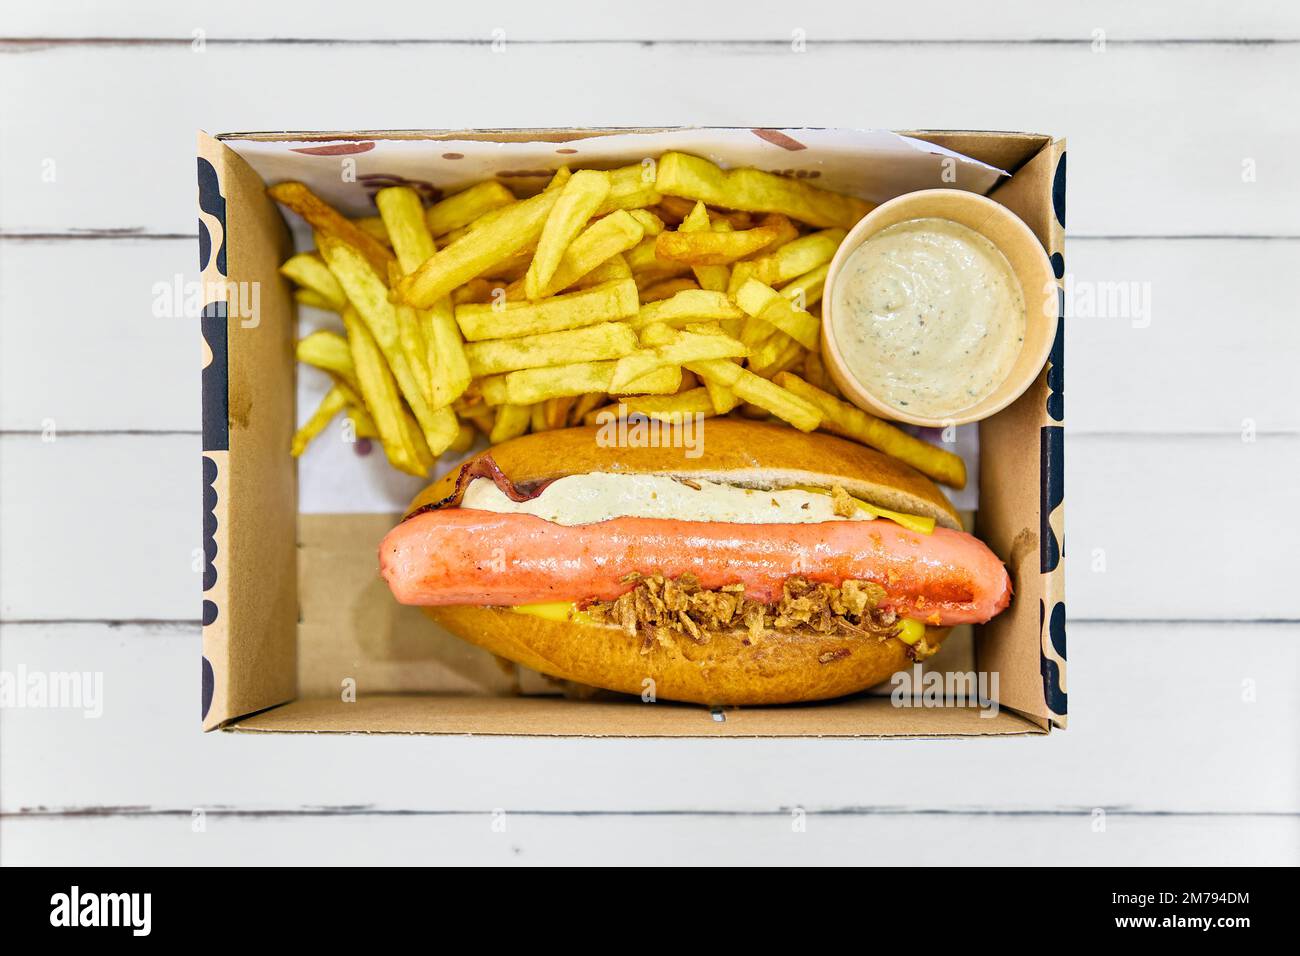 Hot dog menu, served in a cardboard box with fries and pickle mayonnaise. Stock Photo